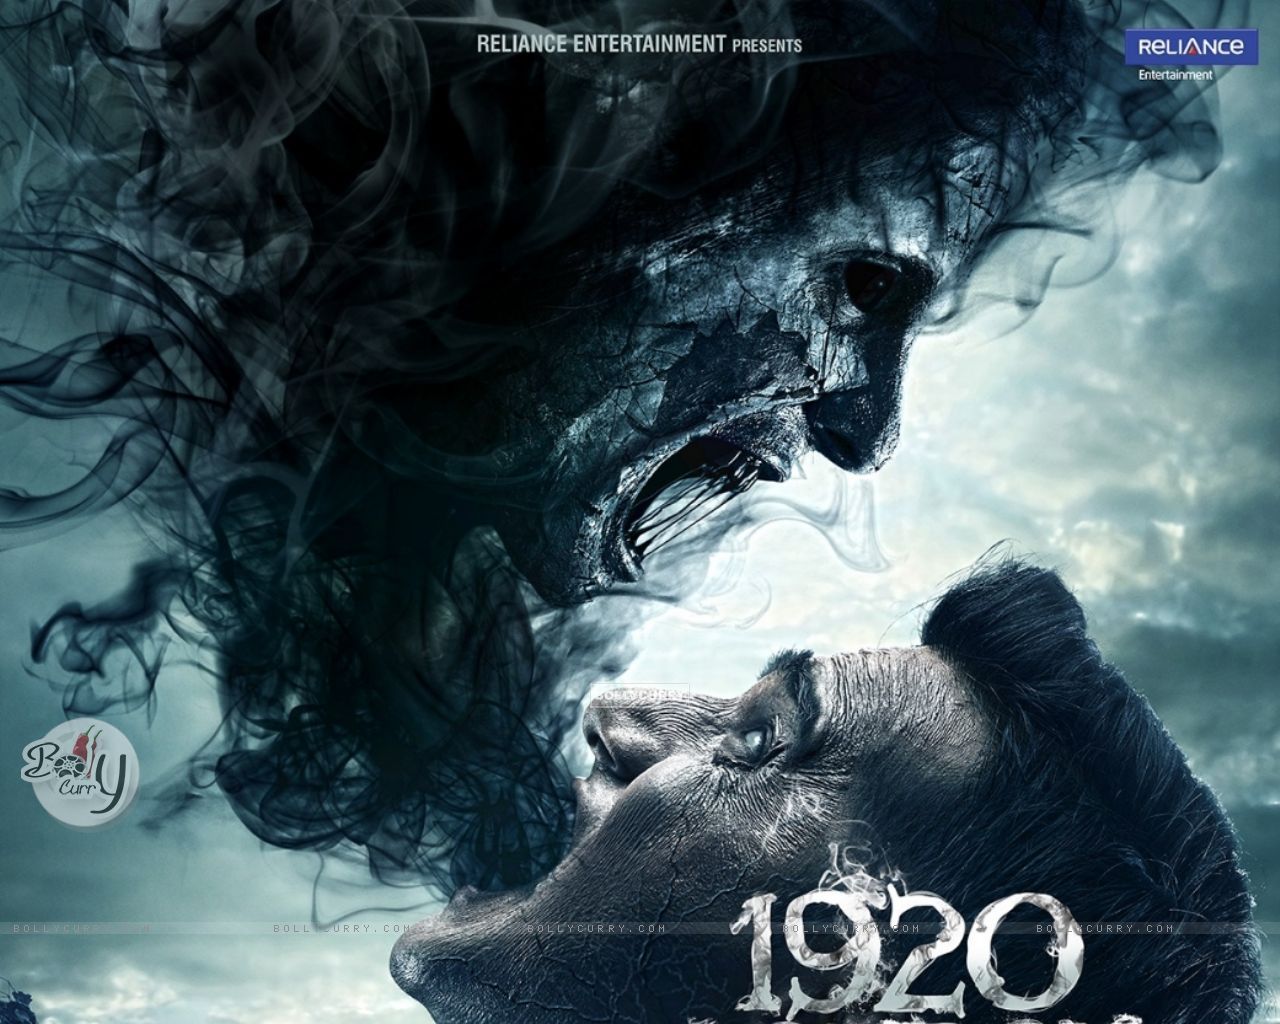 Wallpaper of the film '1920 London' size:1280x1024